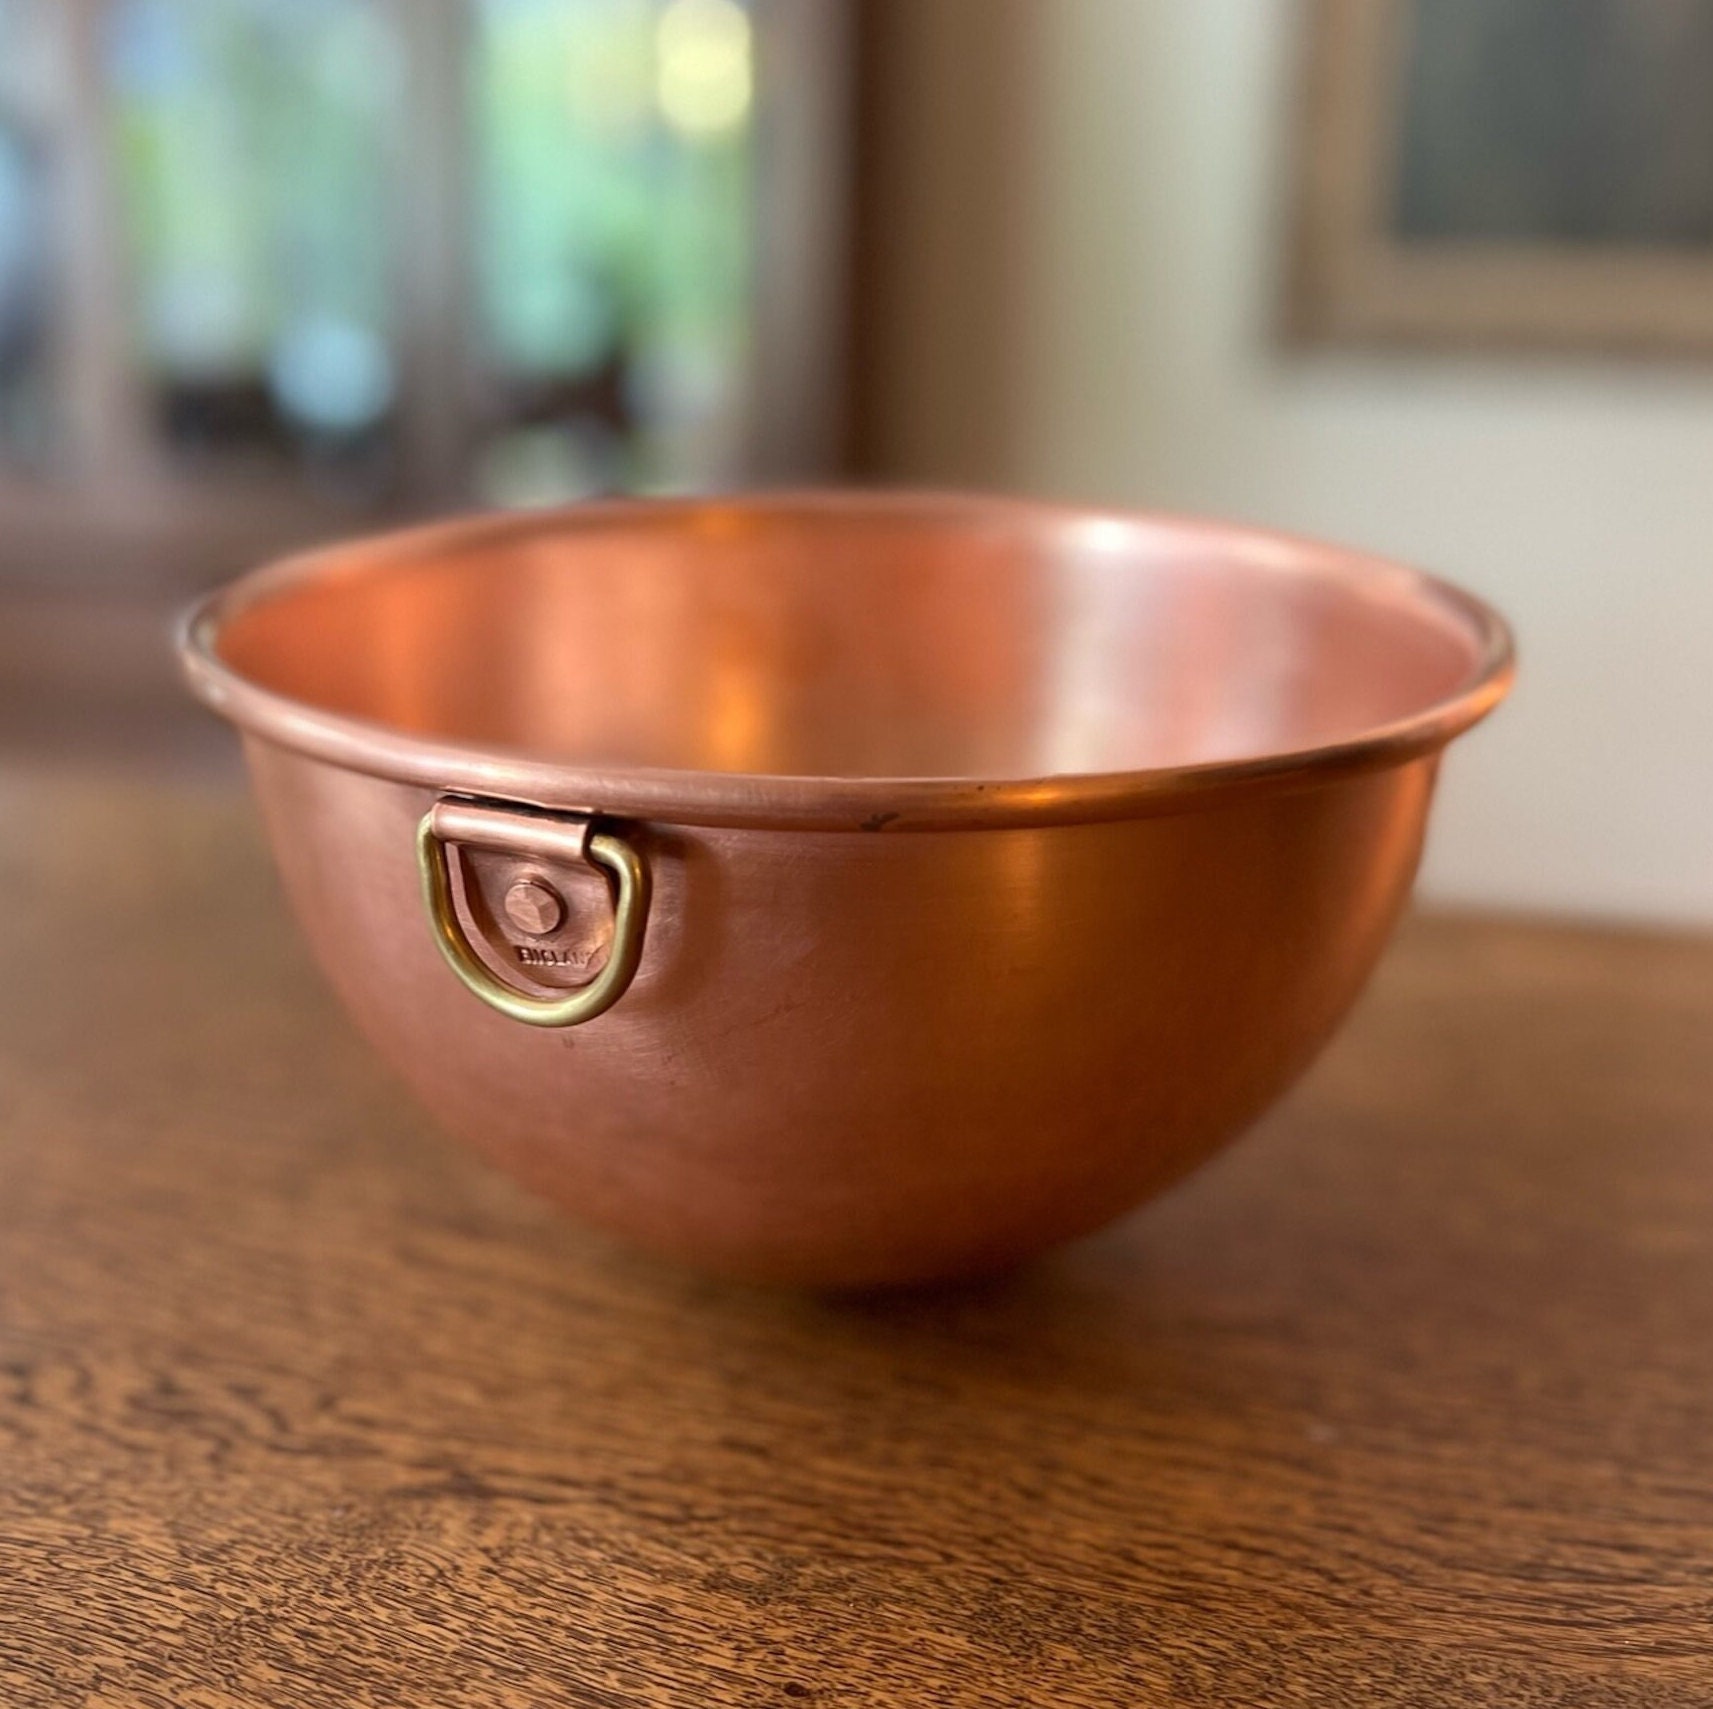 Vintage Copper Mixing Bowl Set of 3 Nesting Made in Korea w/ Brass Ring